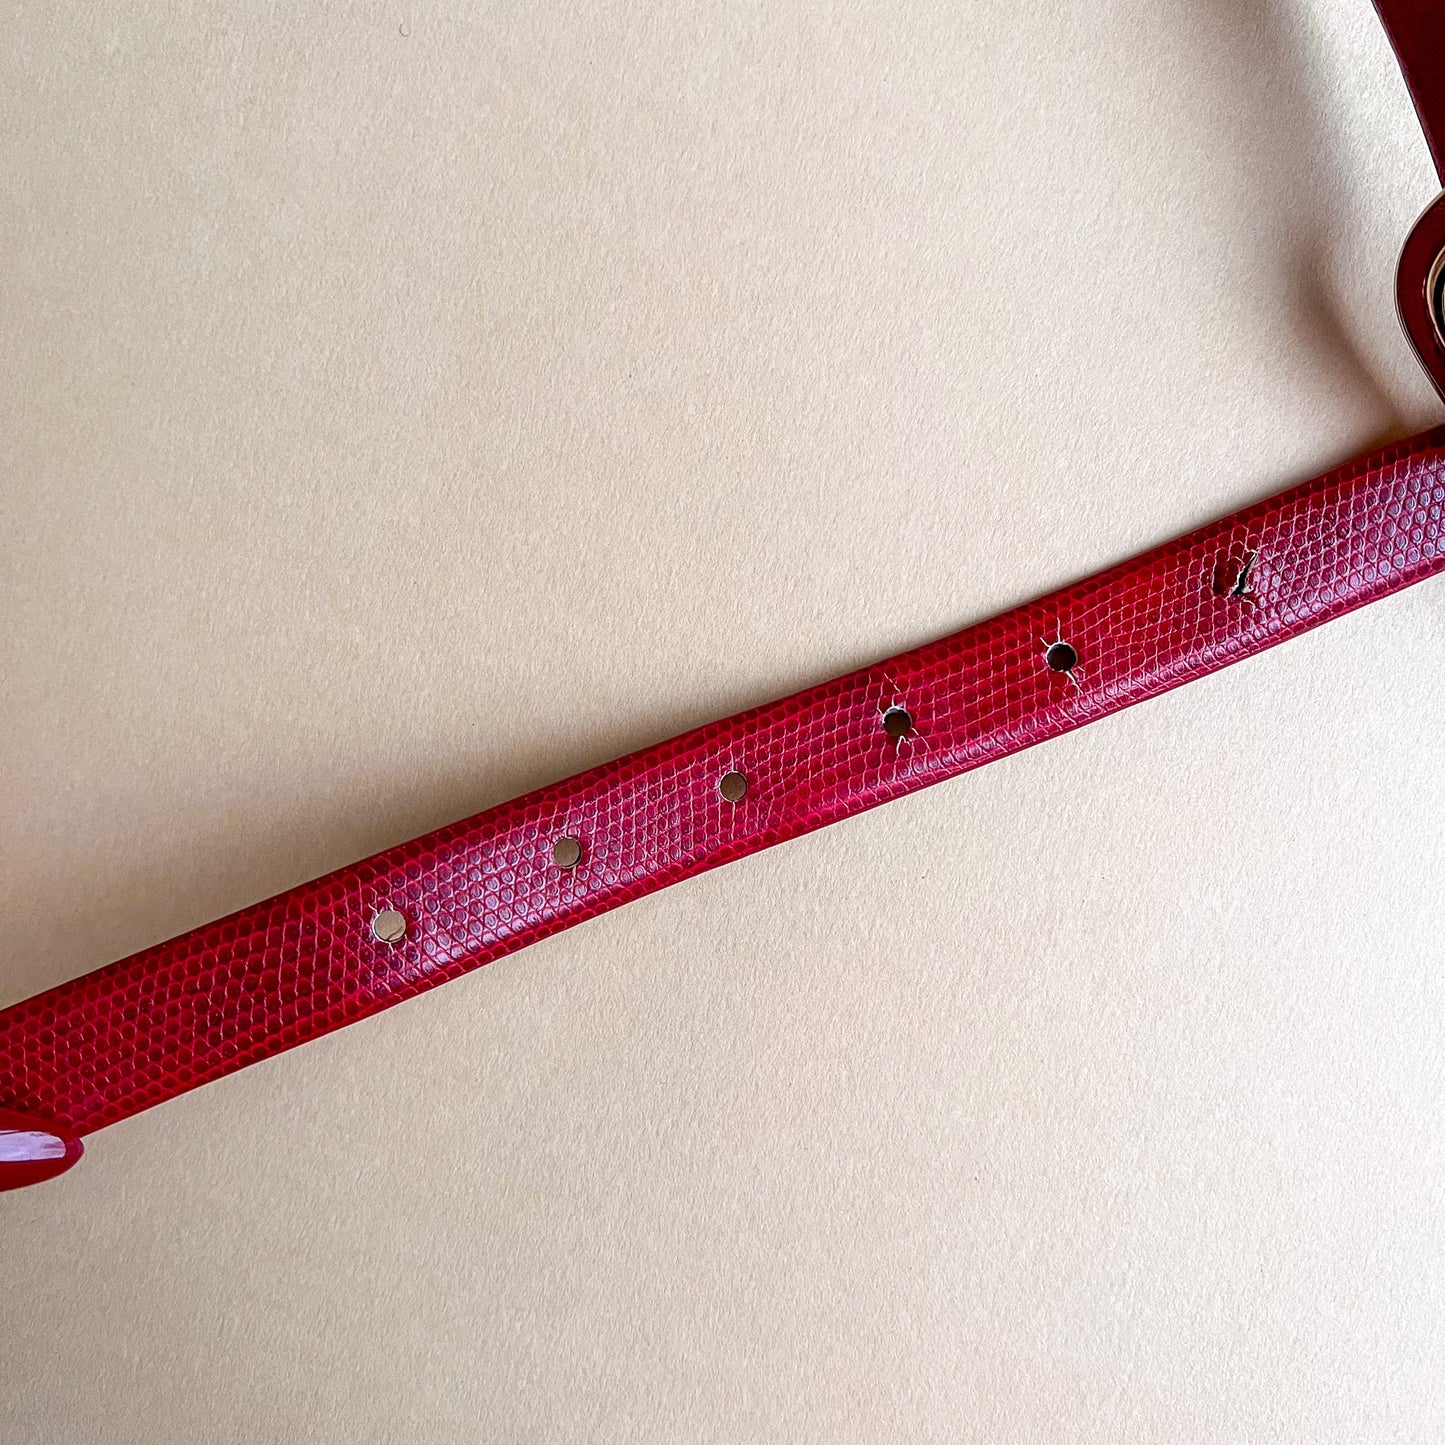 1990s-Does-1960s Red Faux Snakeskin Thin Belt (L)